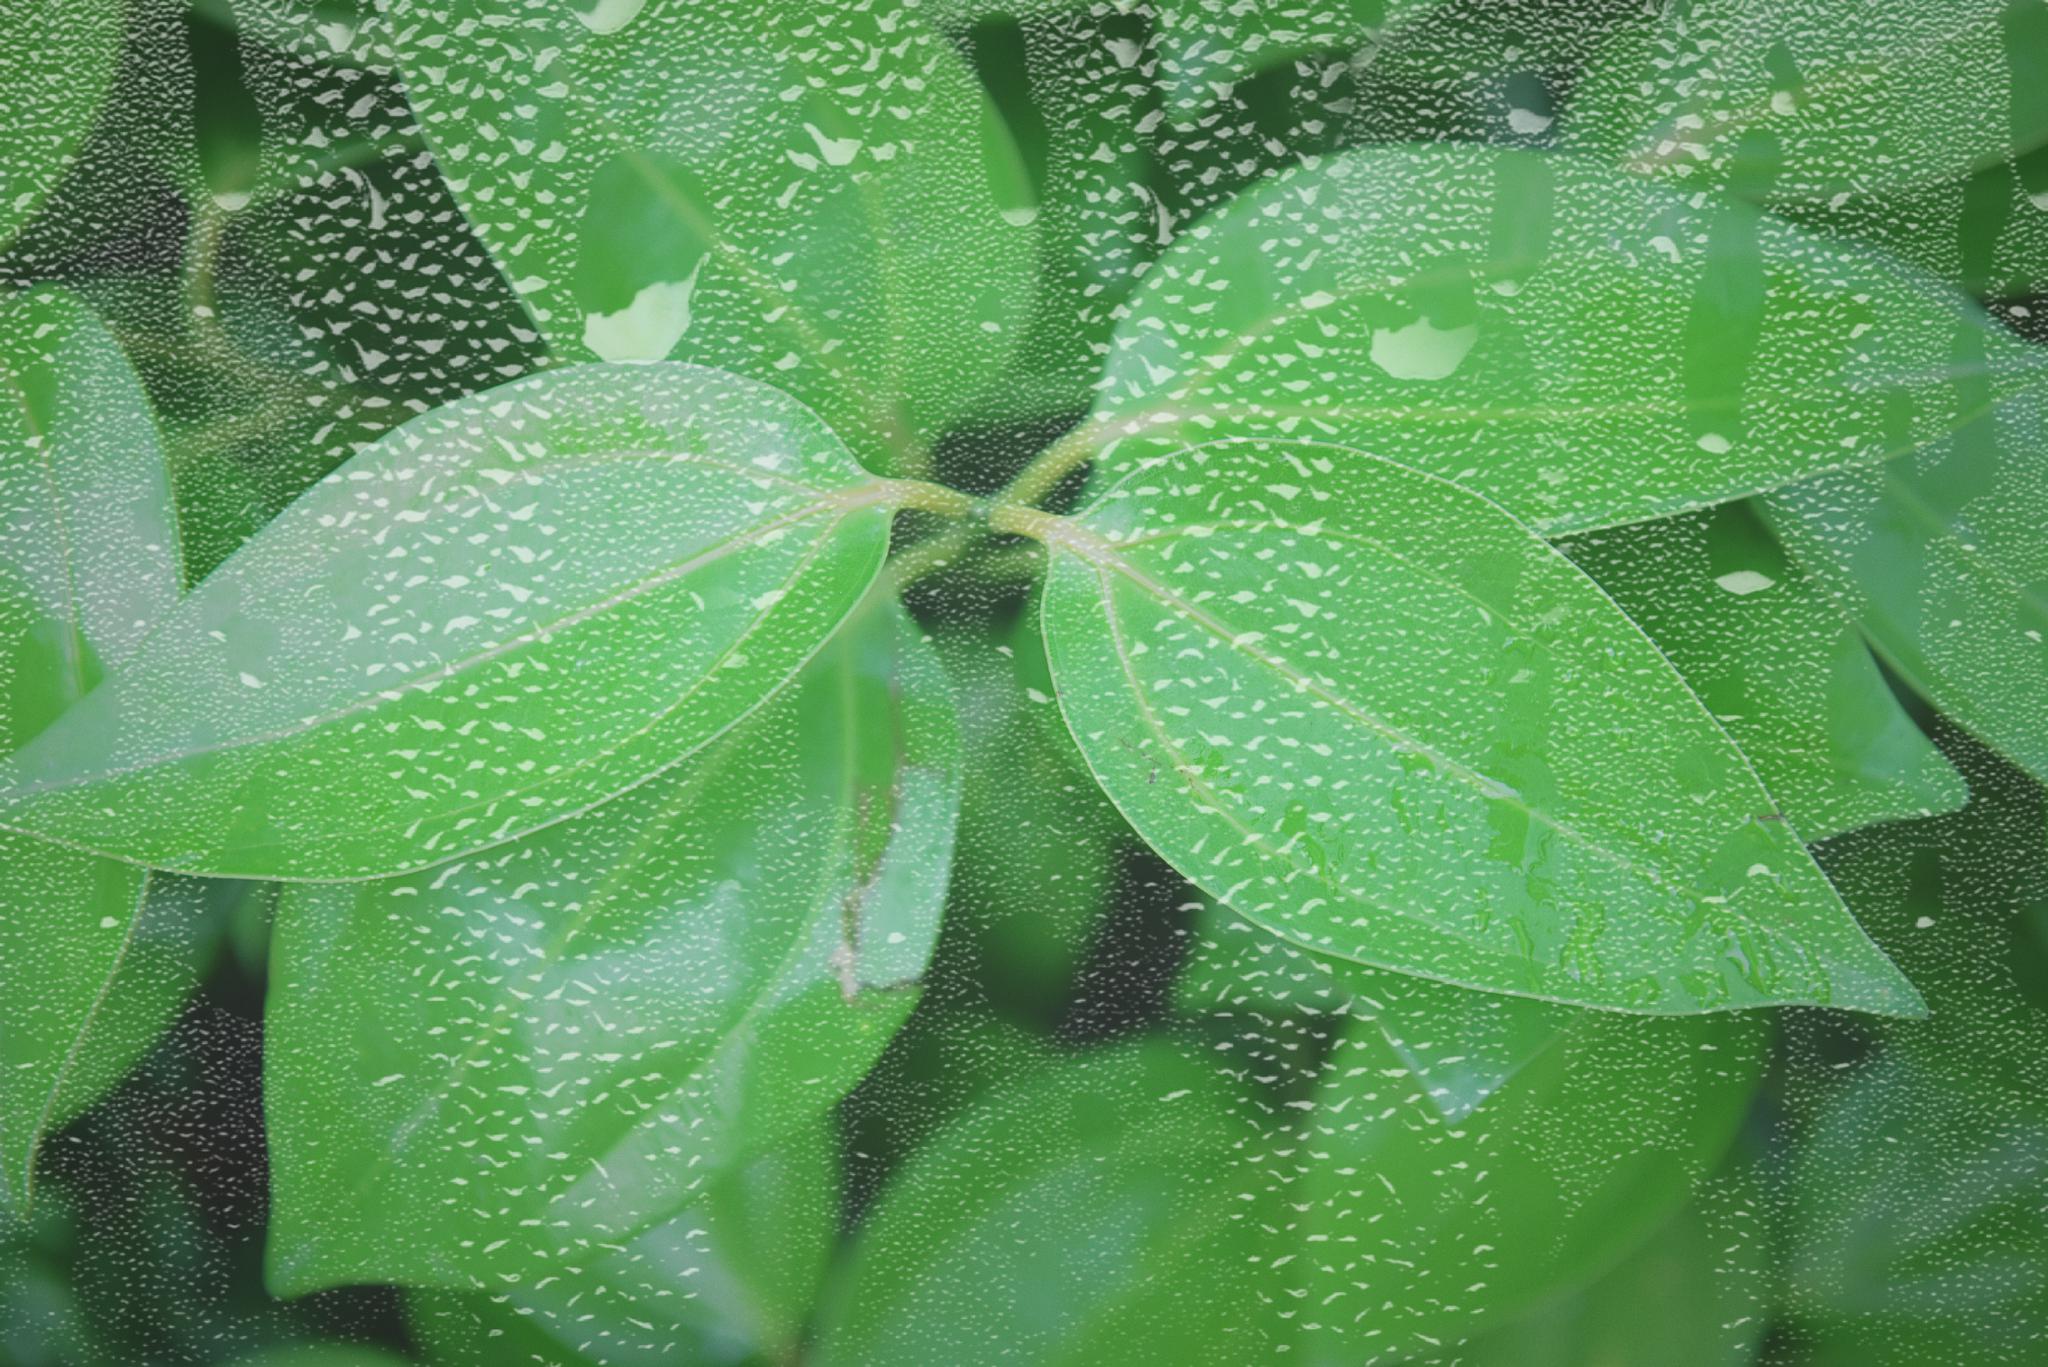 Water Drop On Leaf Free Photo Download | FreeImages